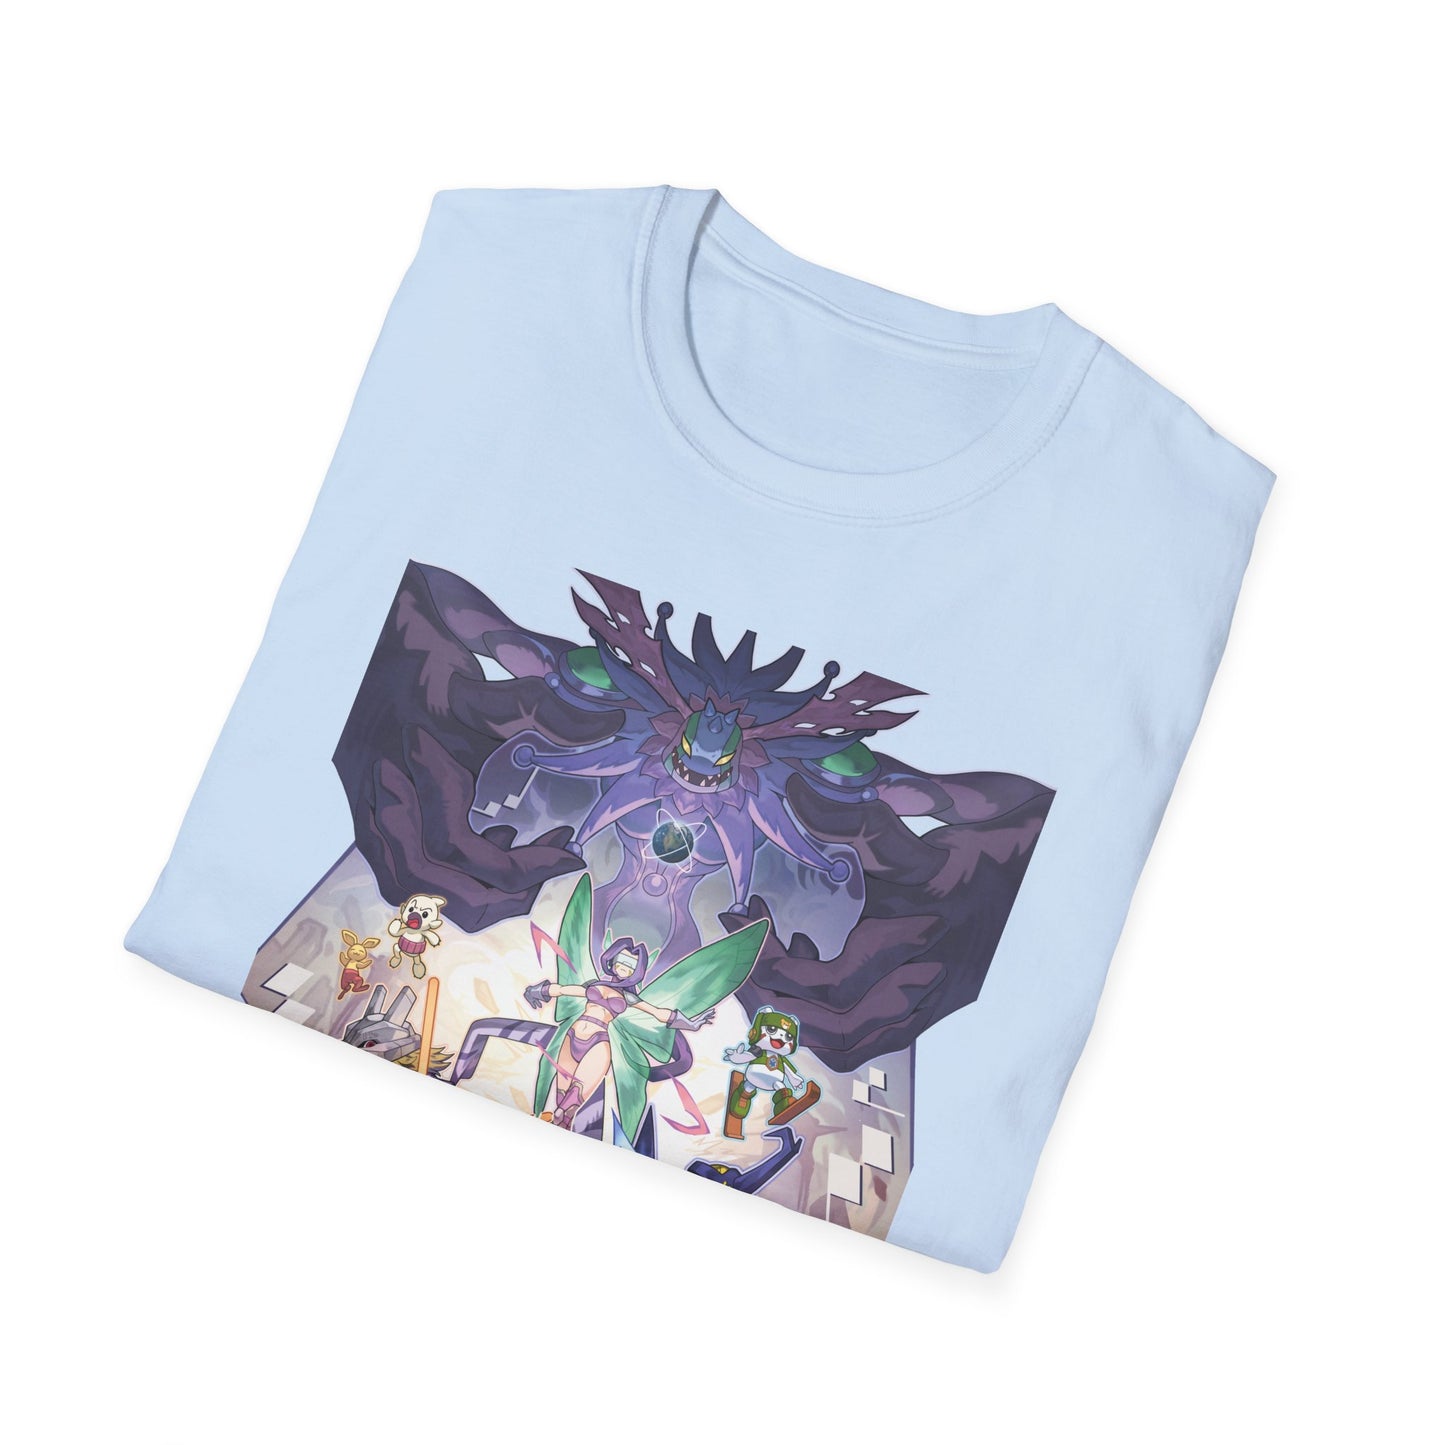 Digimon Frontier T-Shirt Design by Currynoodleart